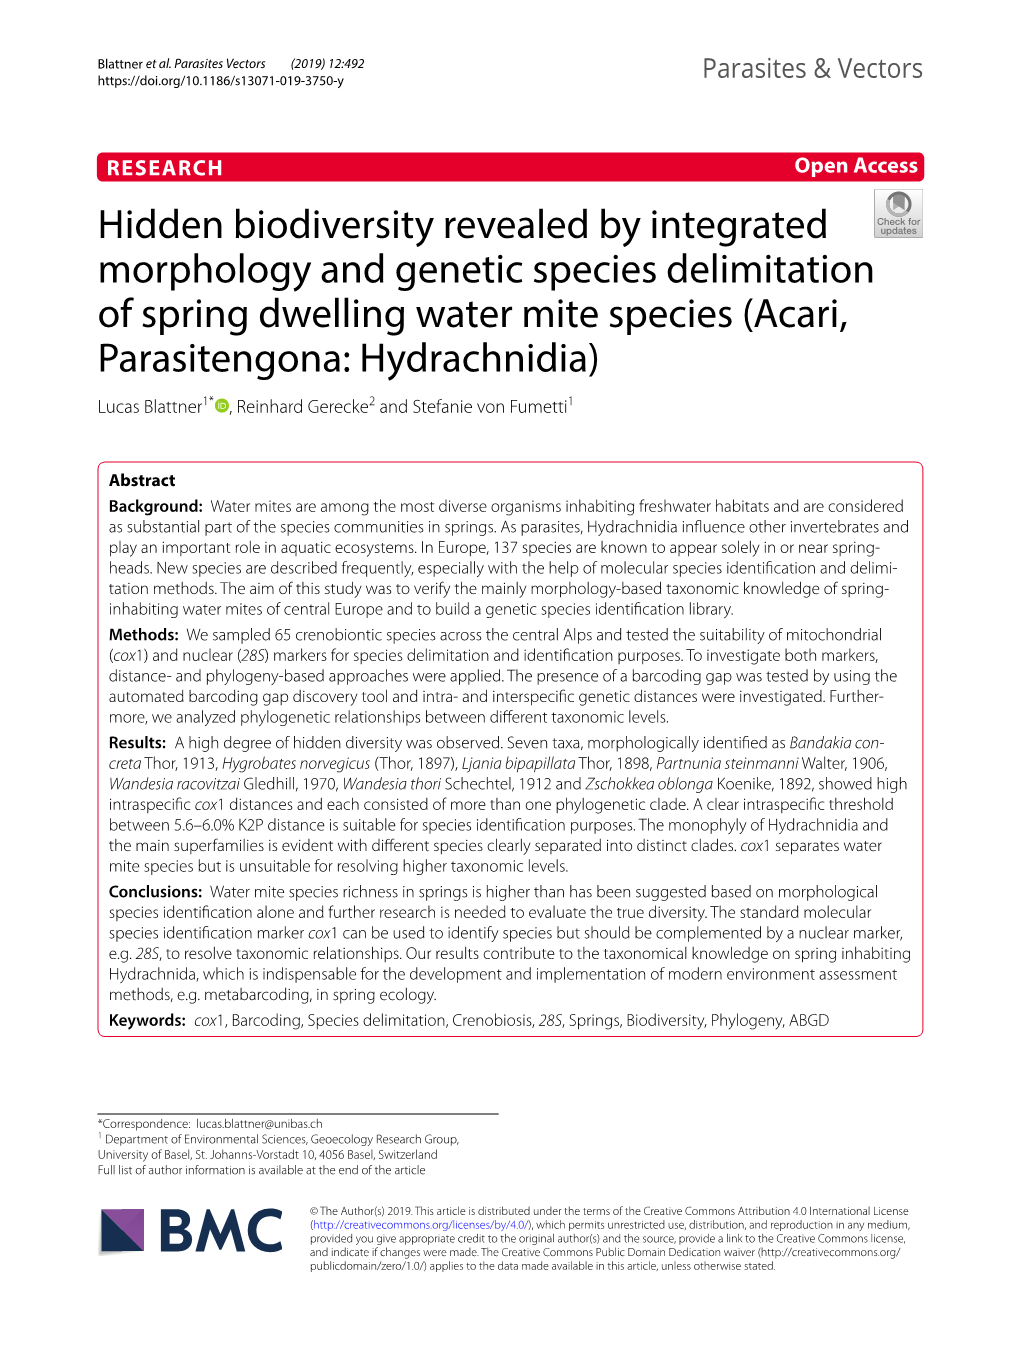 Hidden Biodiversity Revealed by Integrated Morphology And